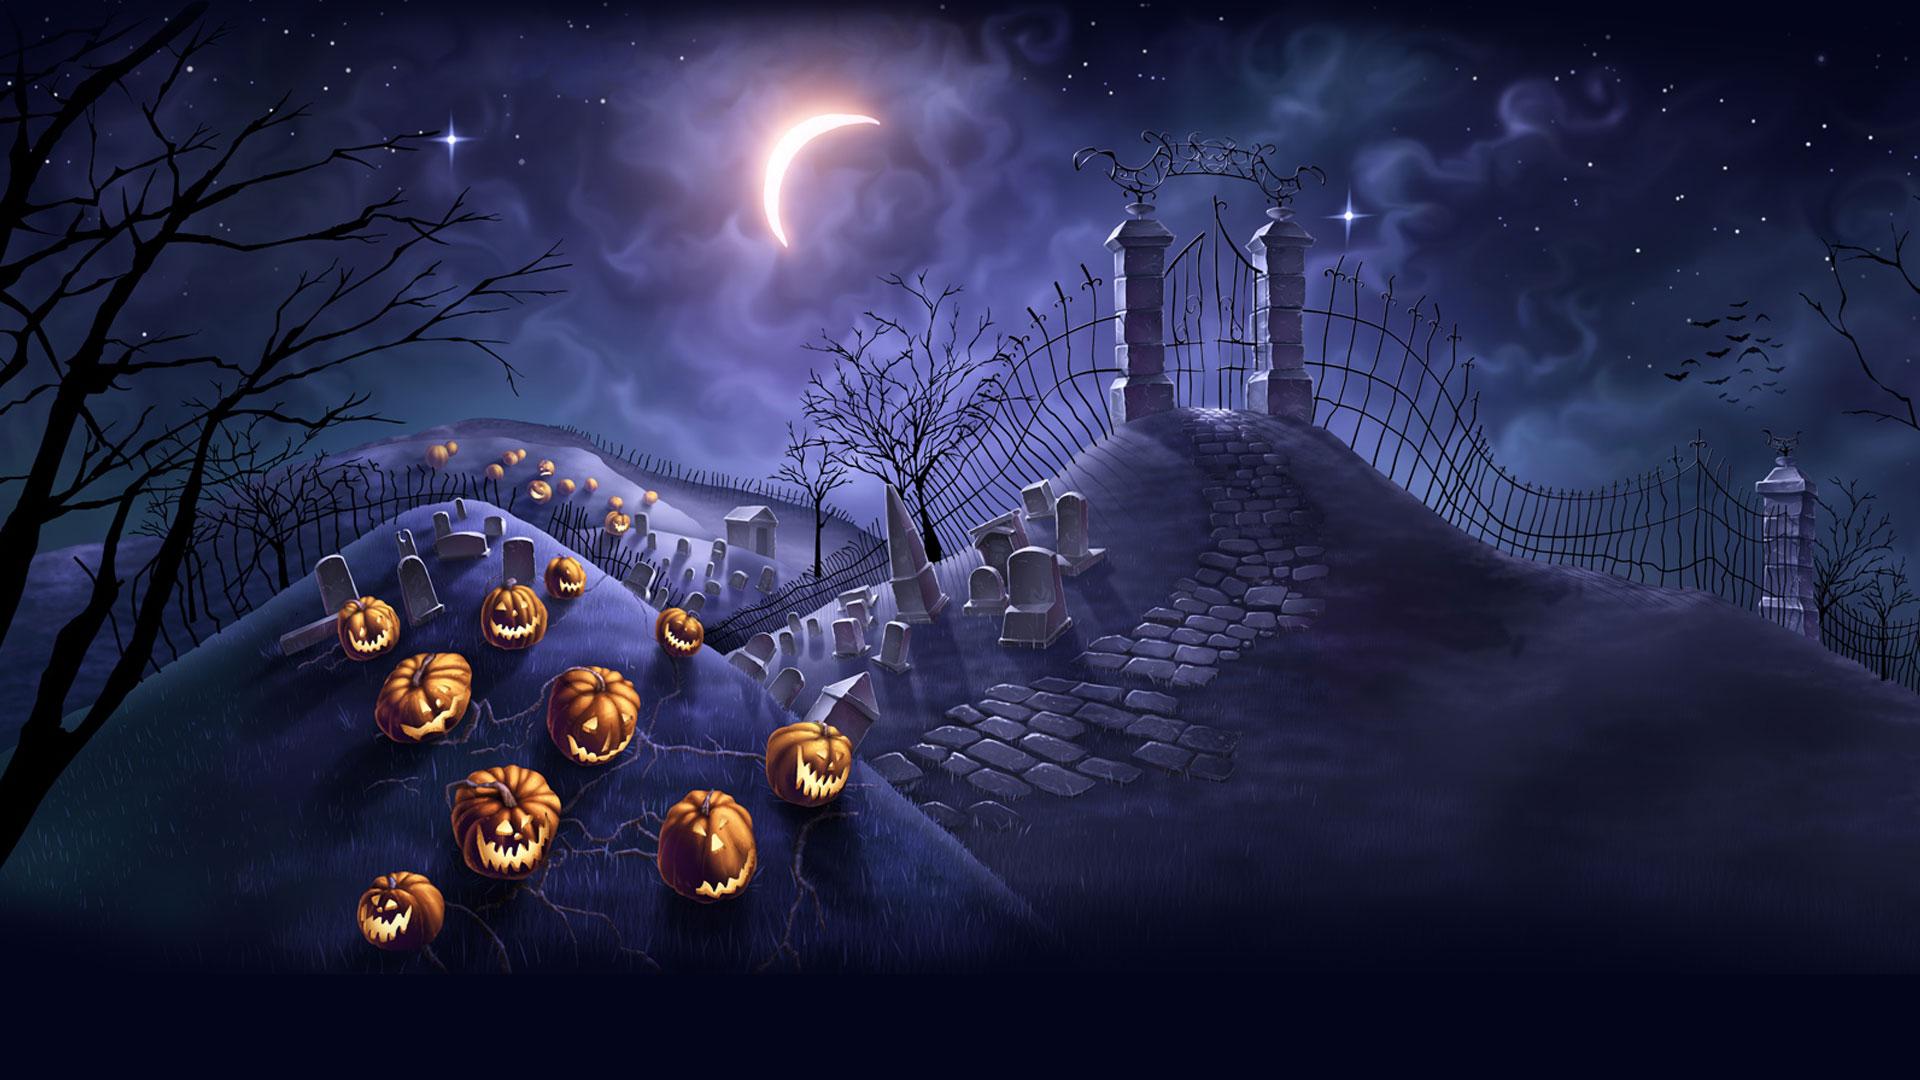 Scary Halloween 2019 Wallpaper HD, Background, Pumpkins, Witches, Bats & Ghosts